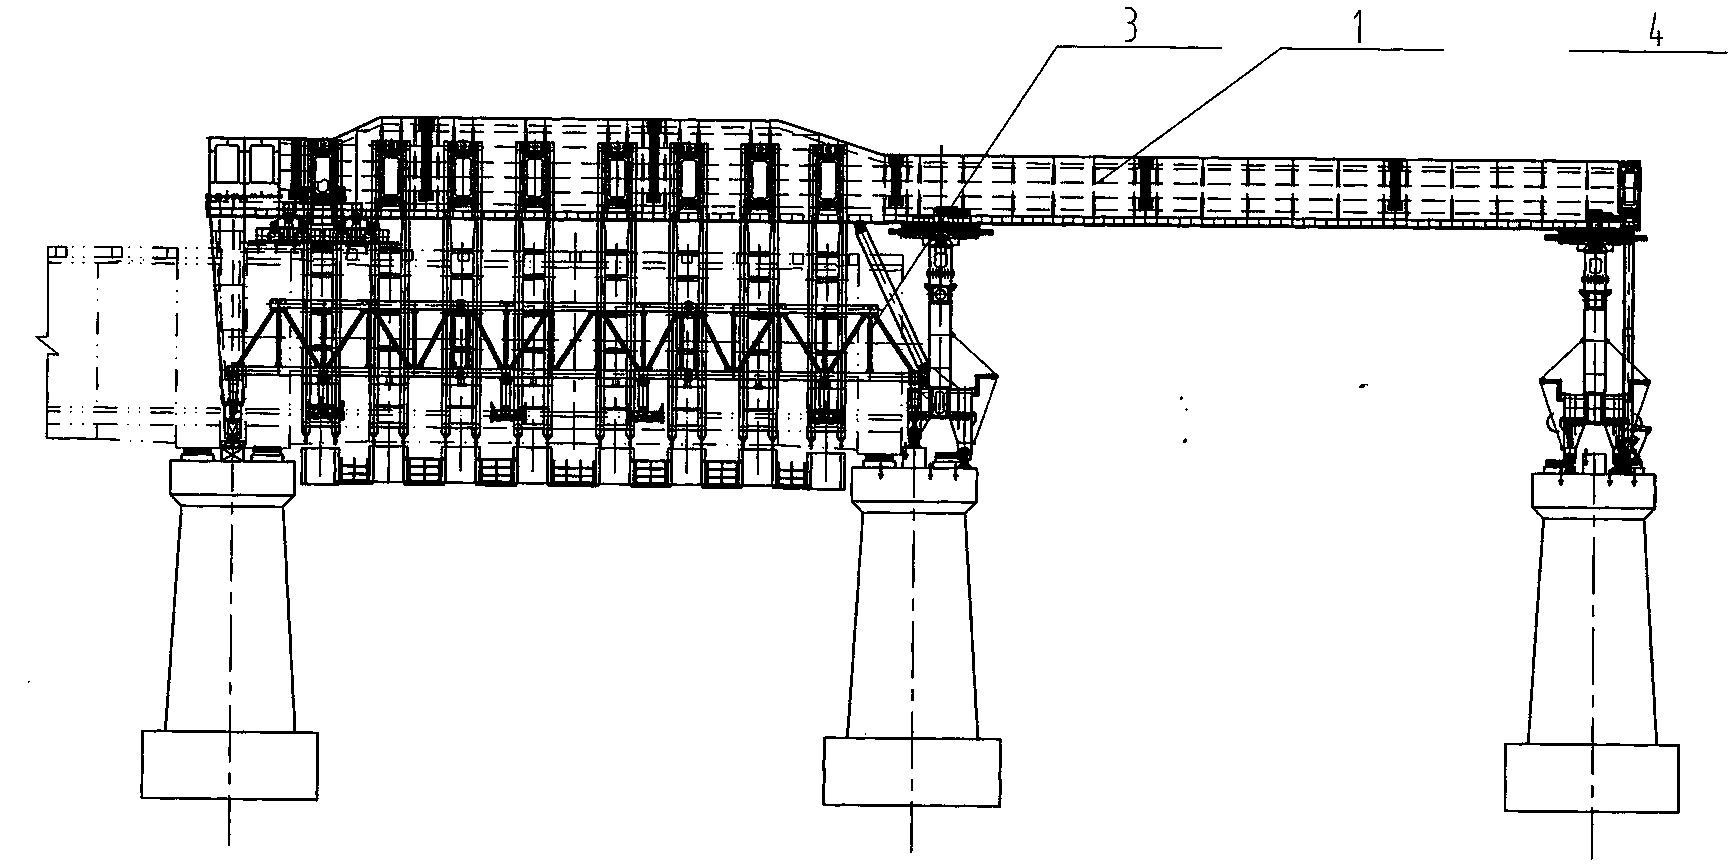 Self-propelled movable formwork for construction of double-rectangle water conservancy aqueduct